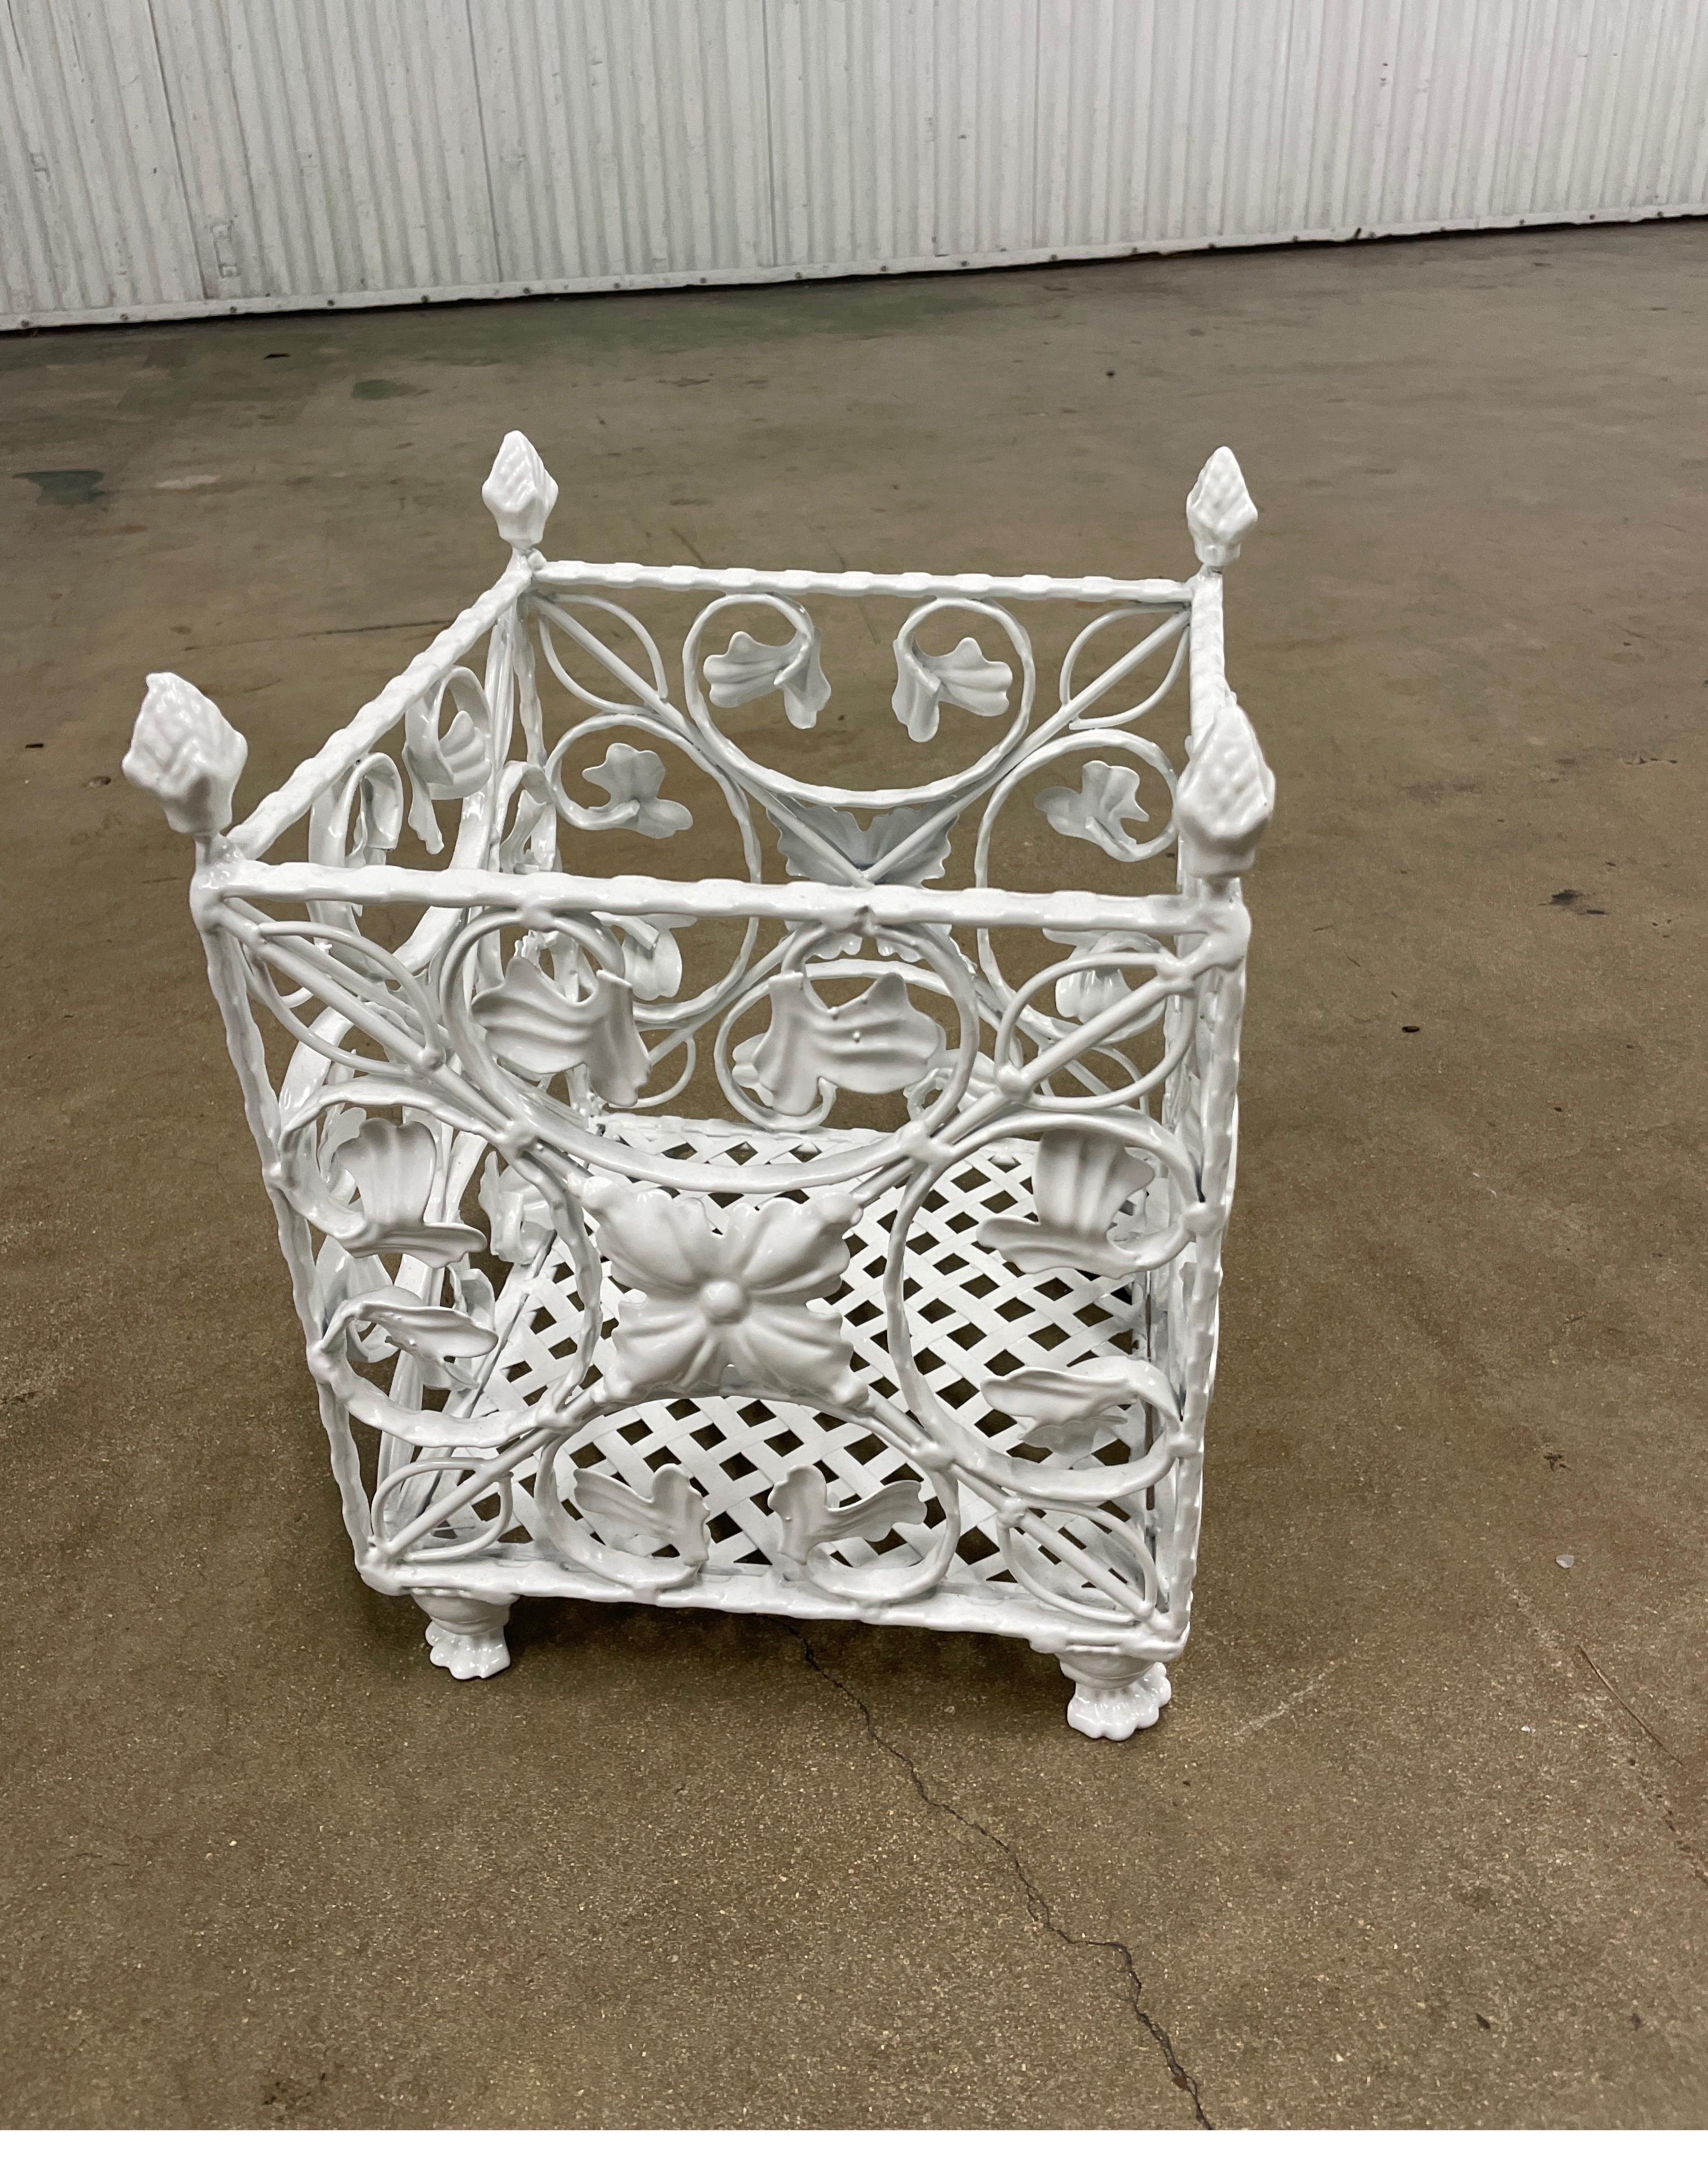 Vintage square footed wrought iron planter box with lattice bottom and scrolled sides with leaves. Each corner finished with an acorn on top.